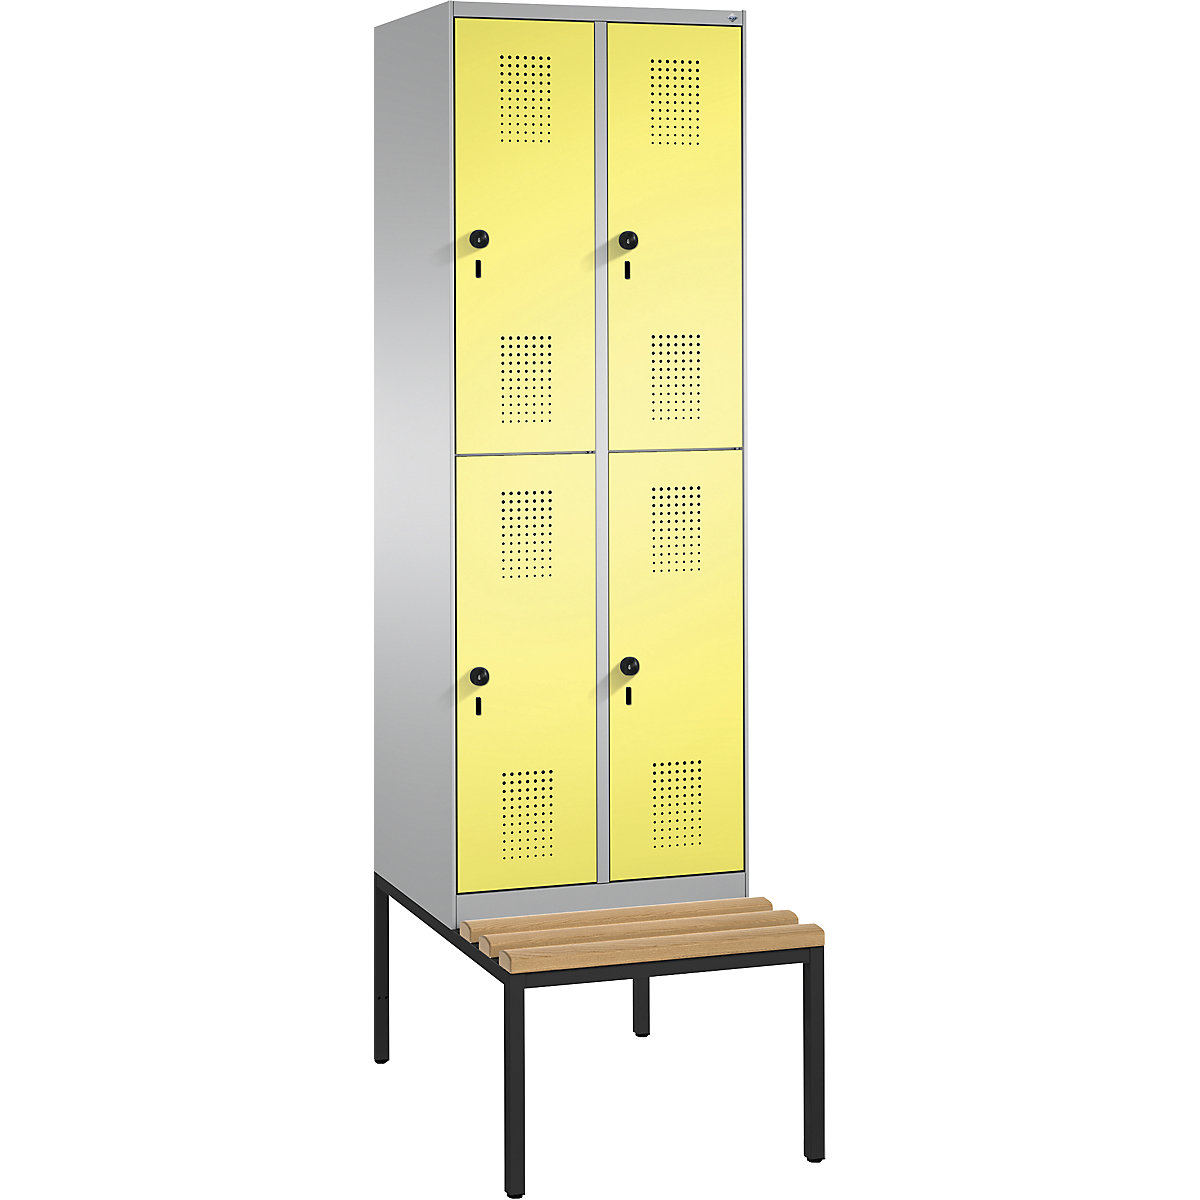 EVOLO cloakroom locker, double tier, with bench – C+P, 2 compartments, 2 shelf compartments each, compartment width 300 mm, white aluminium / sulphur yellow-13